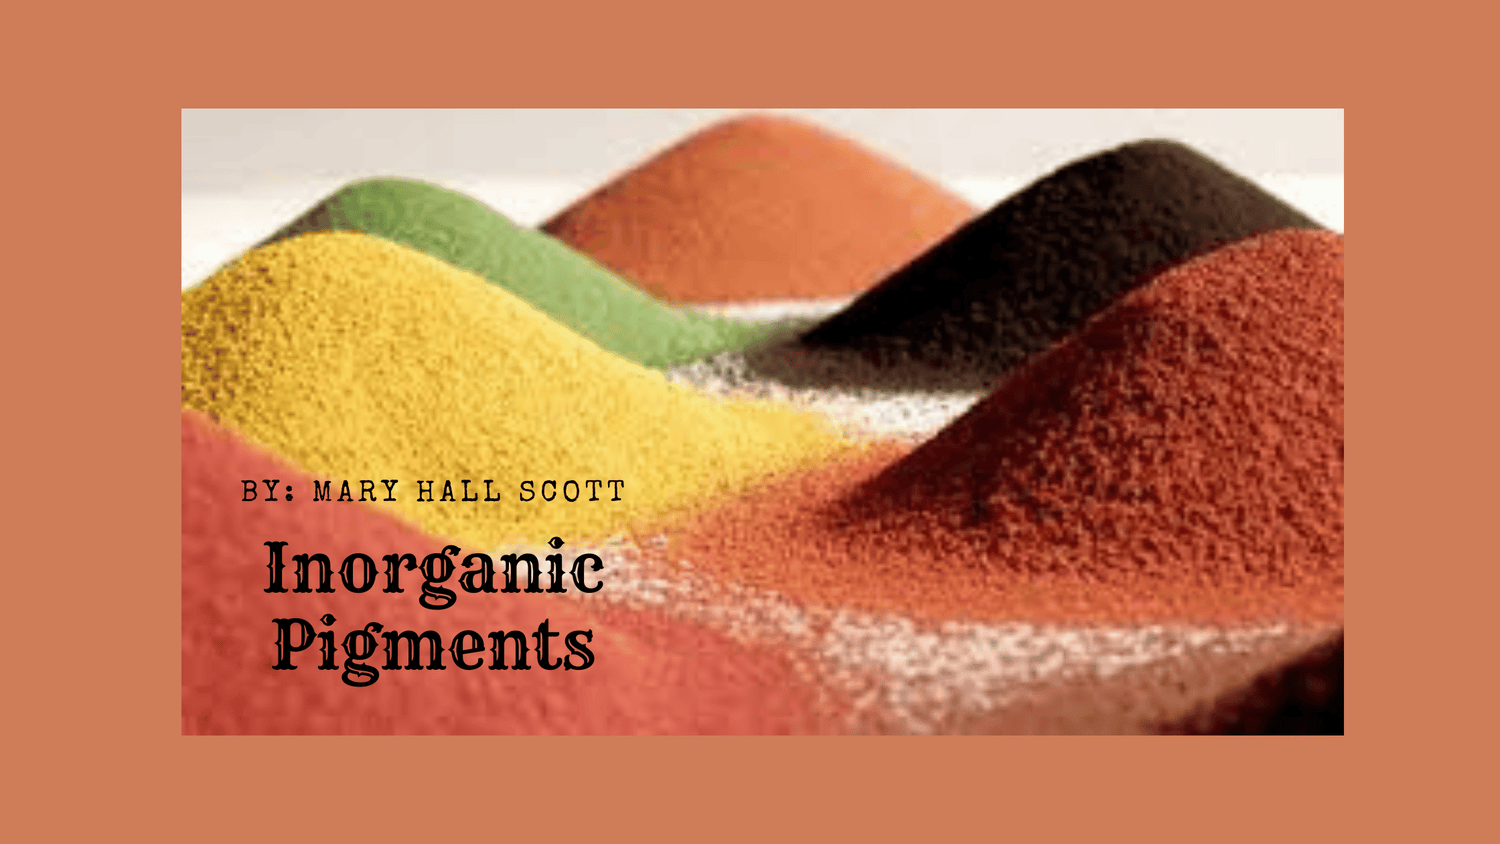 How many times can you perform Hair-Strokes using an Inorganic Pigment?